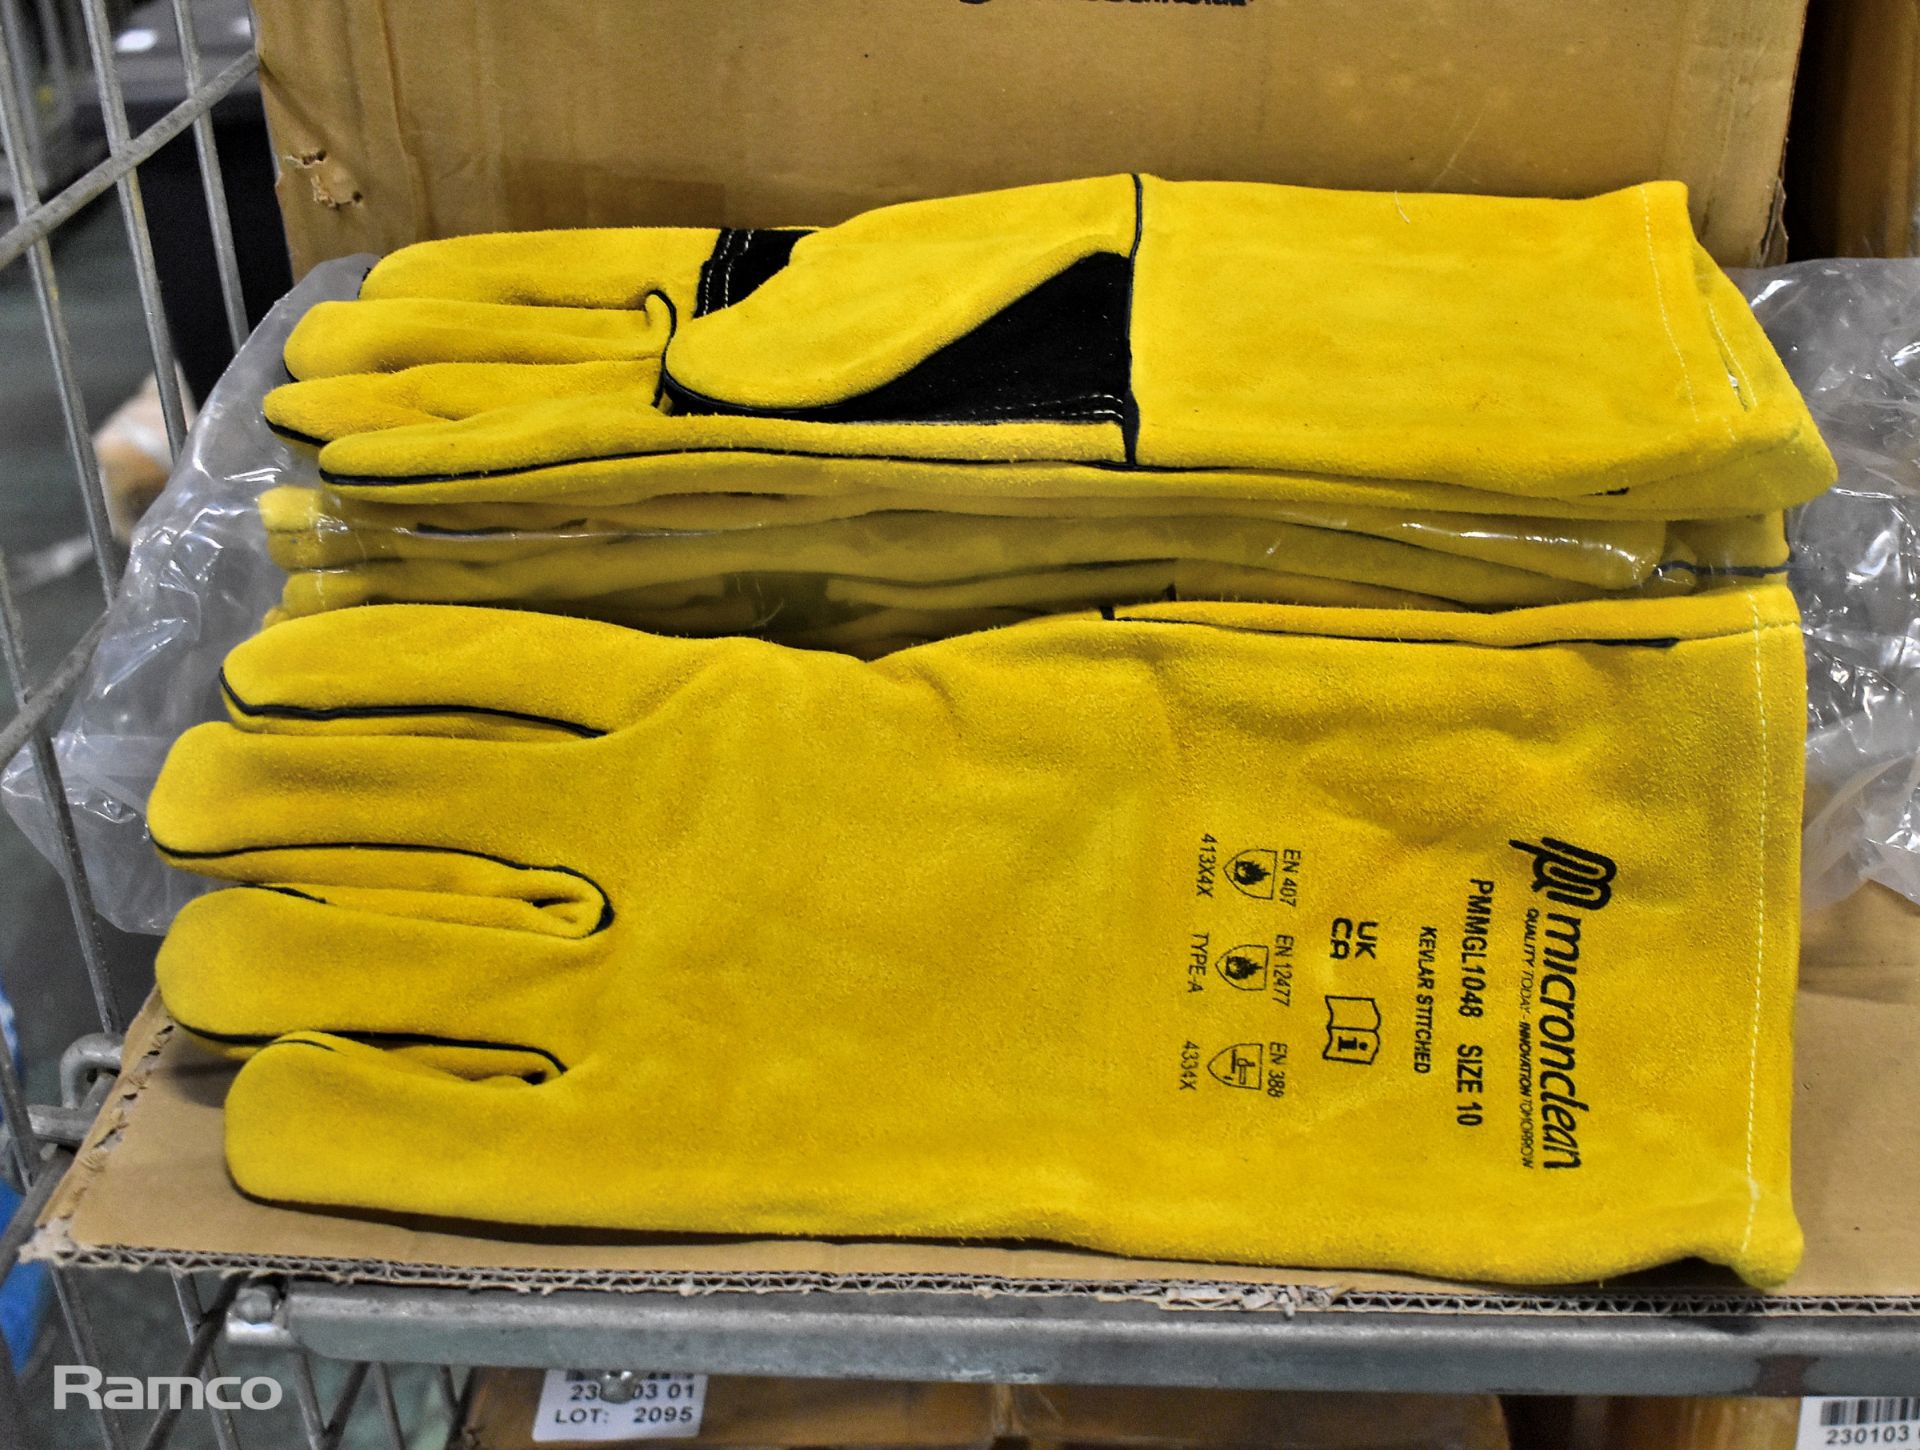 Micronclean Leather kevlar STC cat 2 mig gauntlets size 10 - 1 box - 48 pairs per box - Image 3 of 3